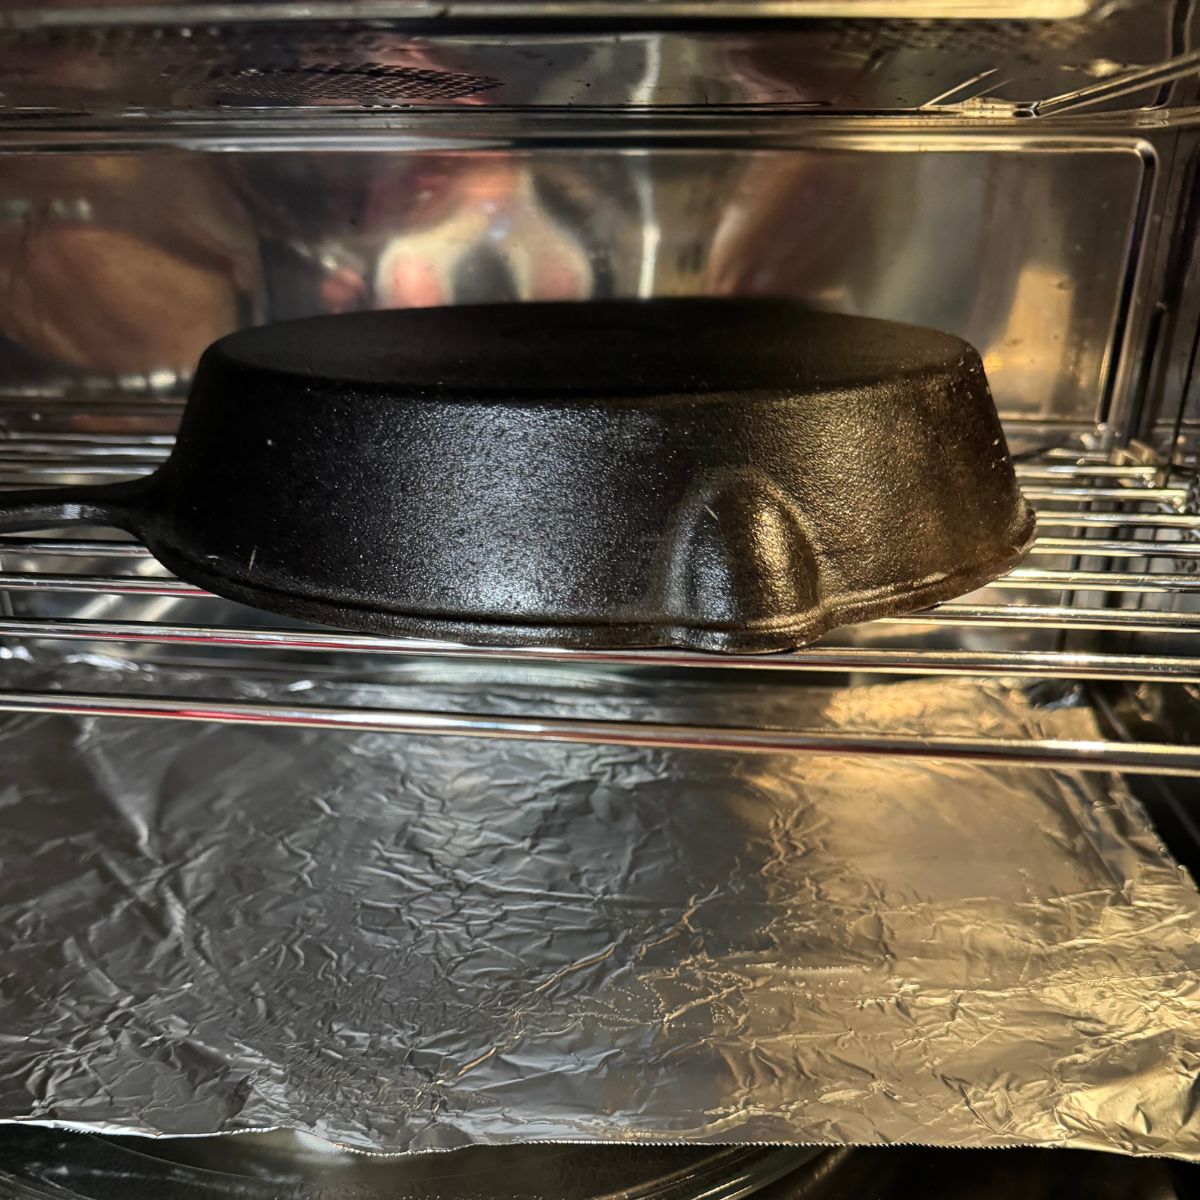 A black cast iron skillet sitting in an oven.